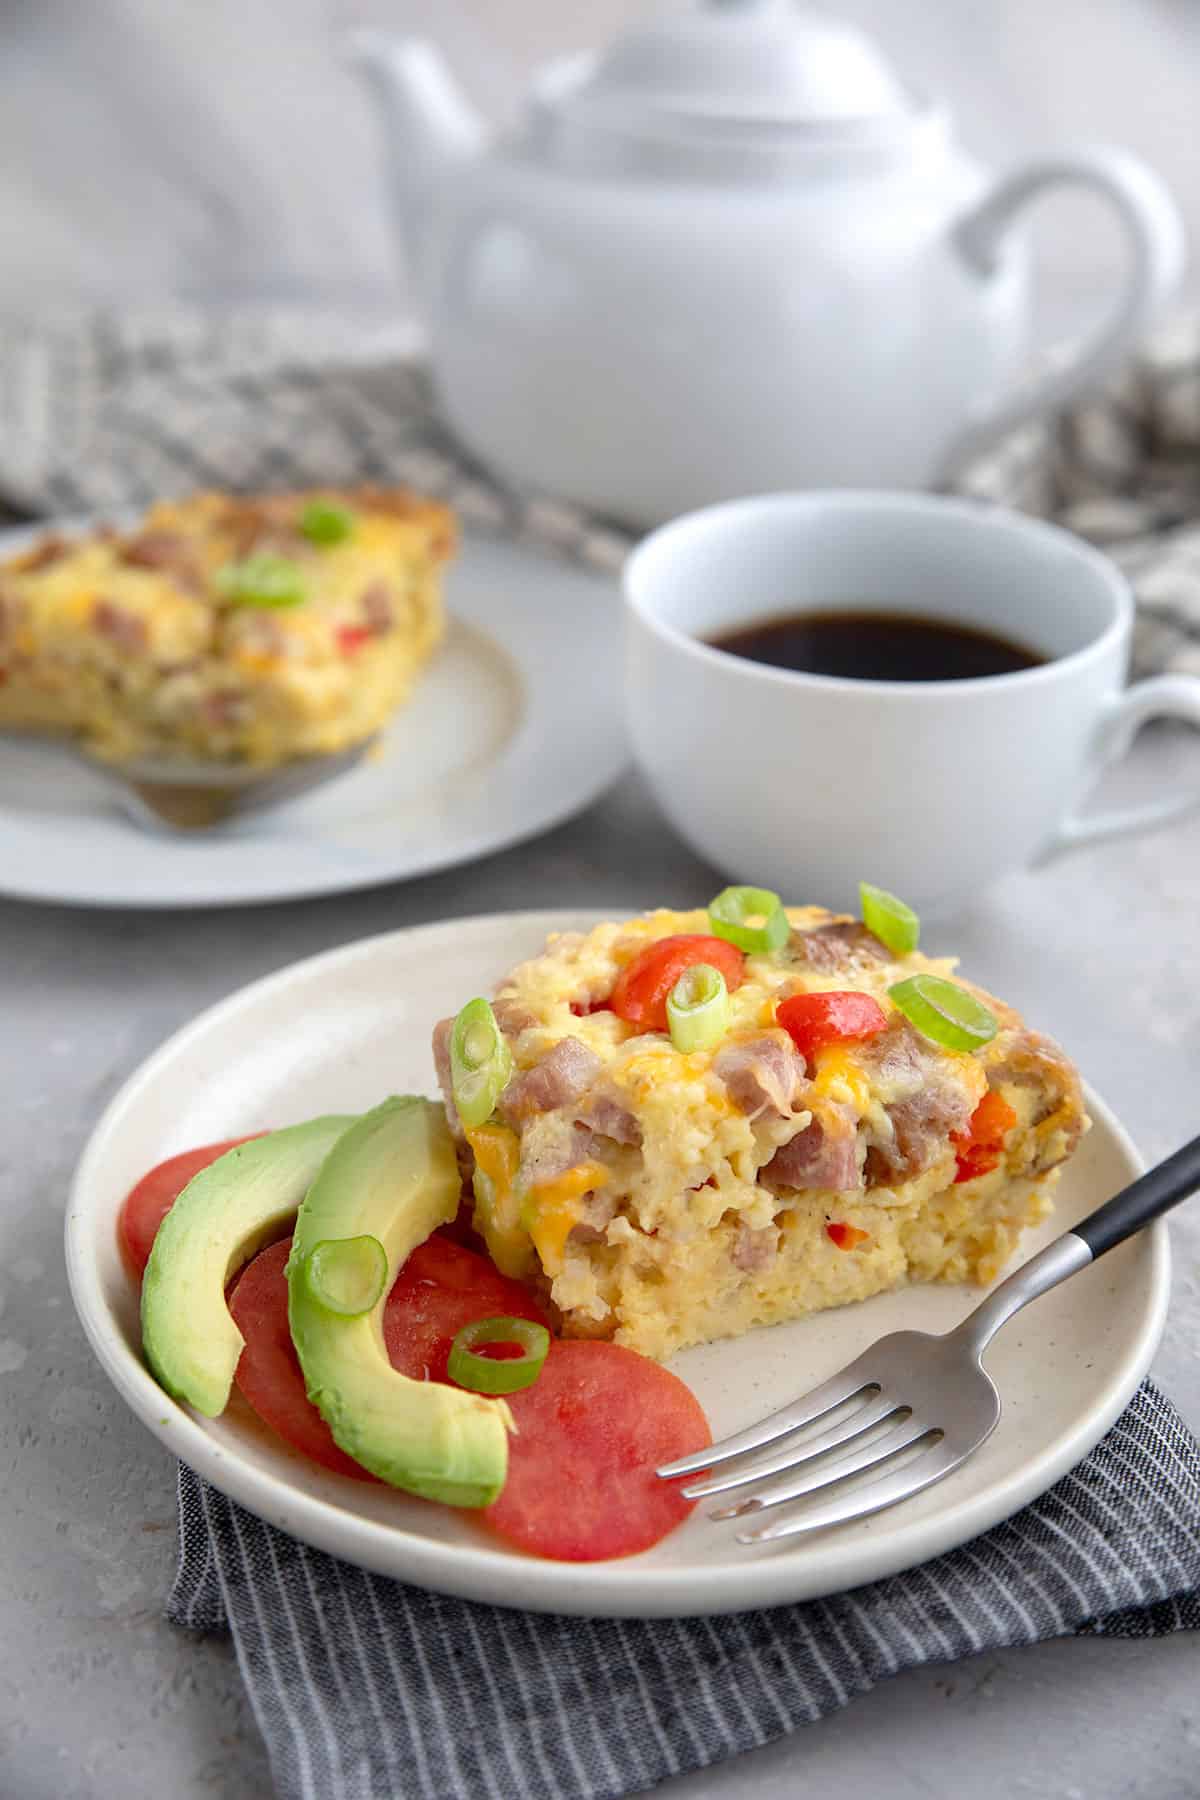 Two slices of Slow Cooker Breakfast Casserole on white plates, with a cup of coffee and a coffee pot in the background.